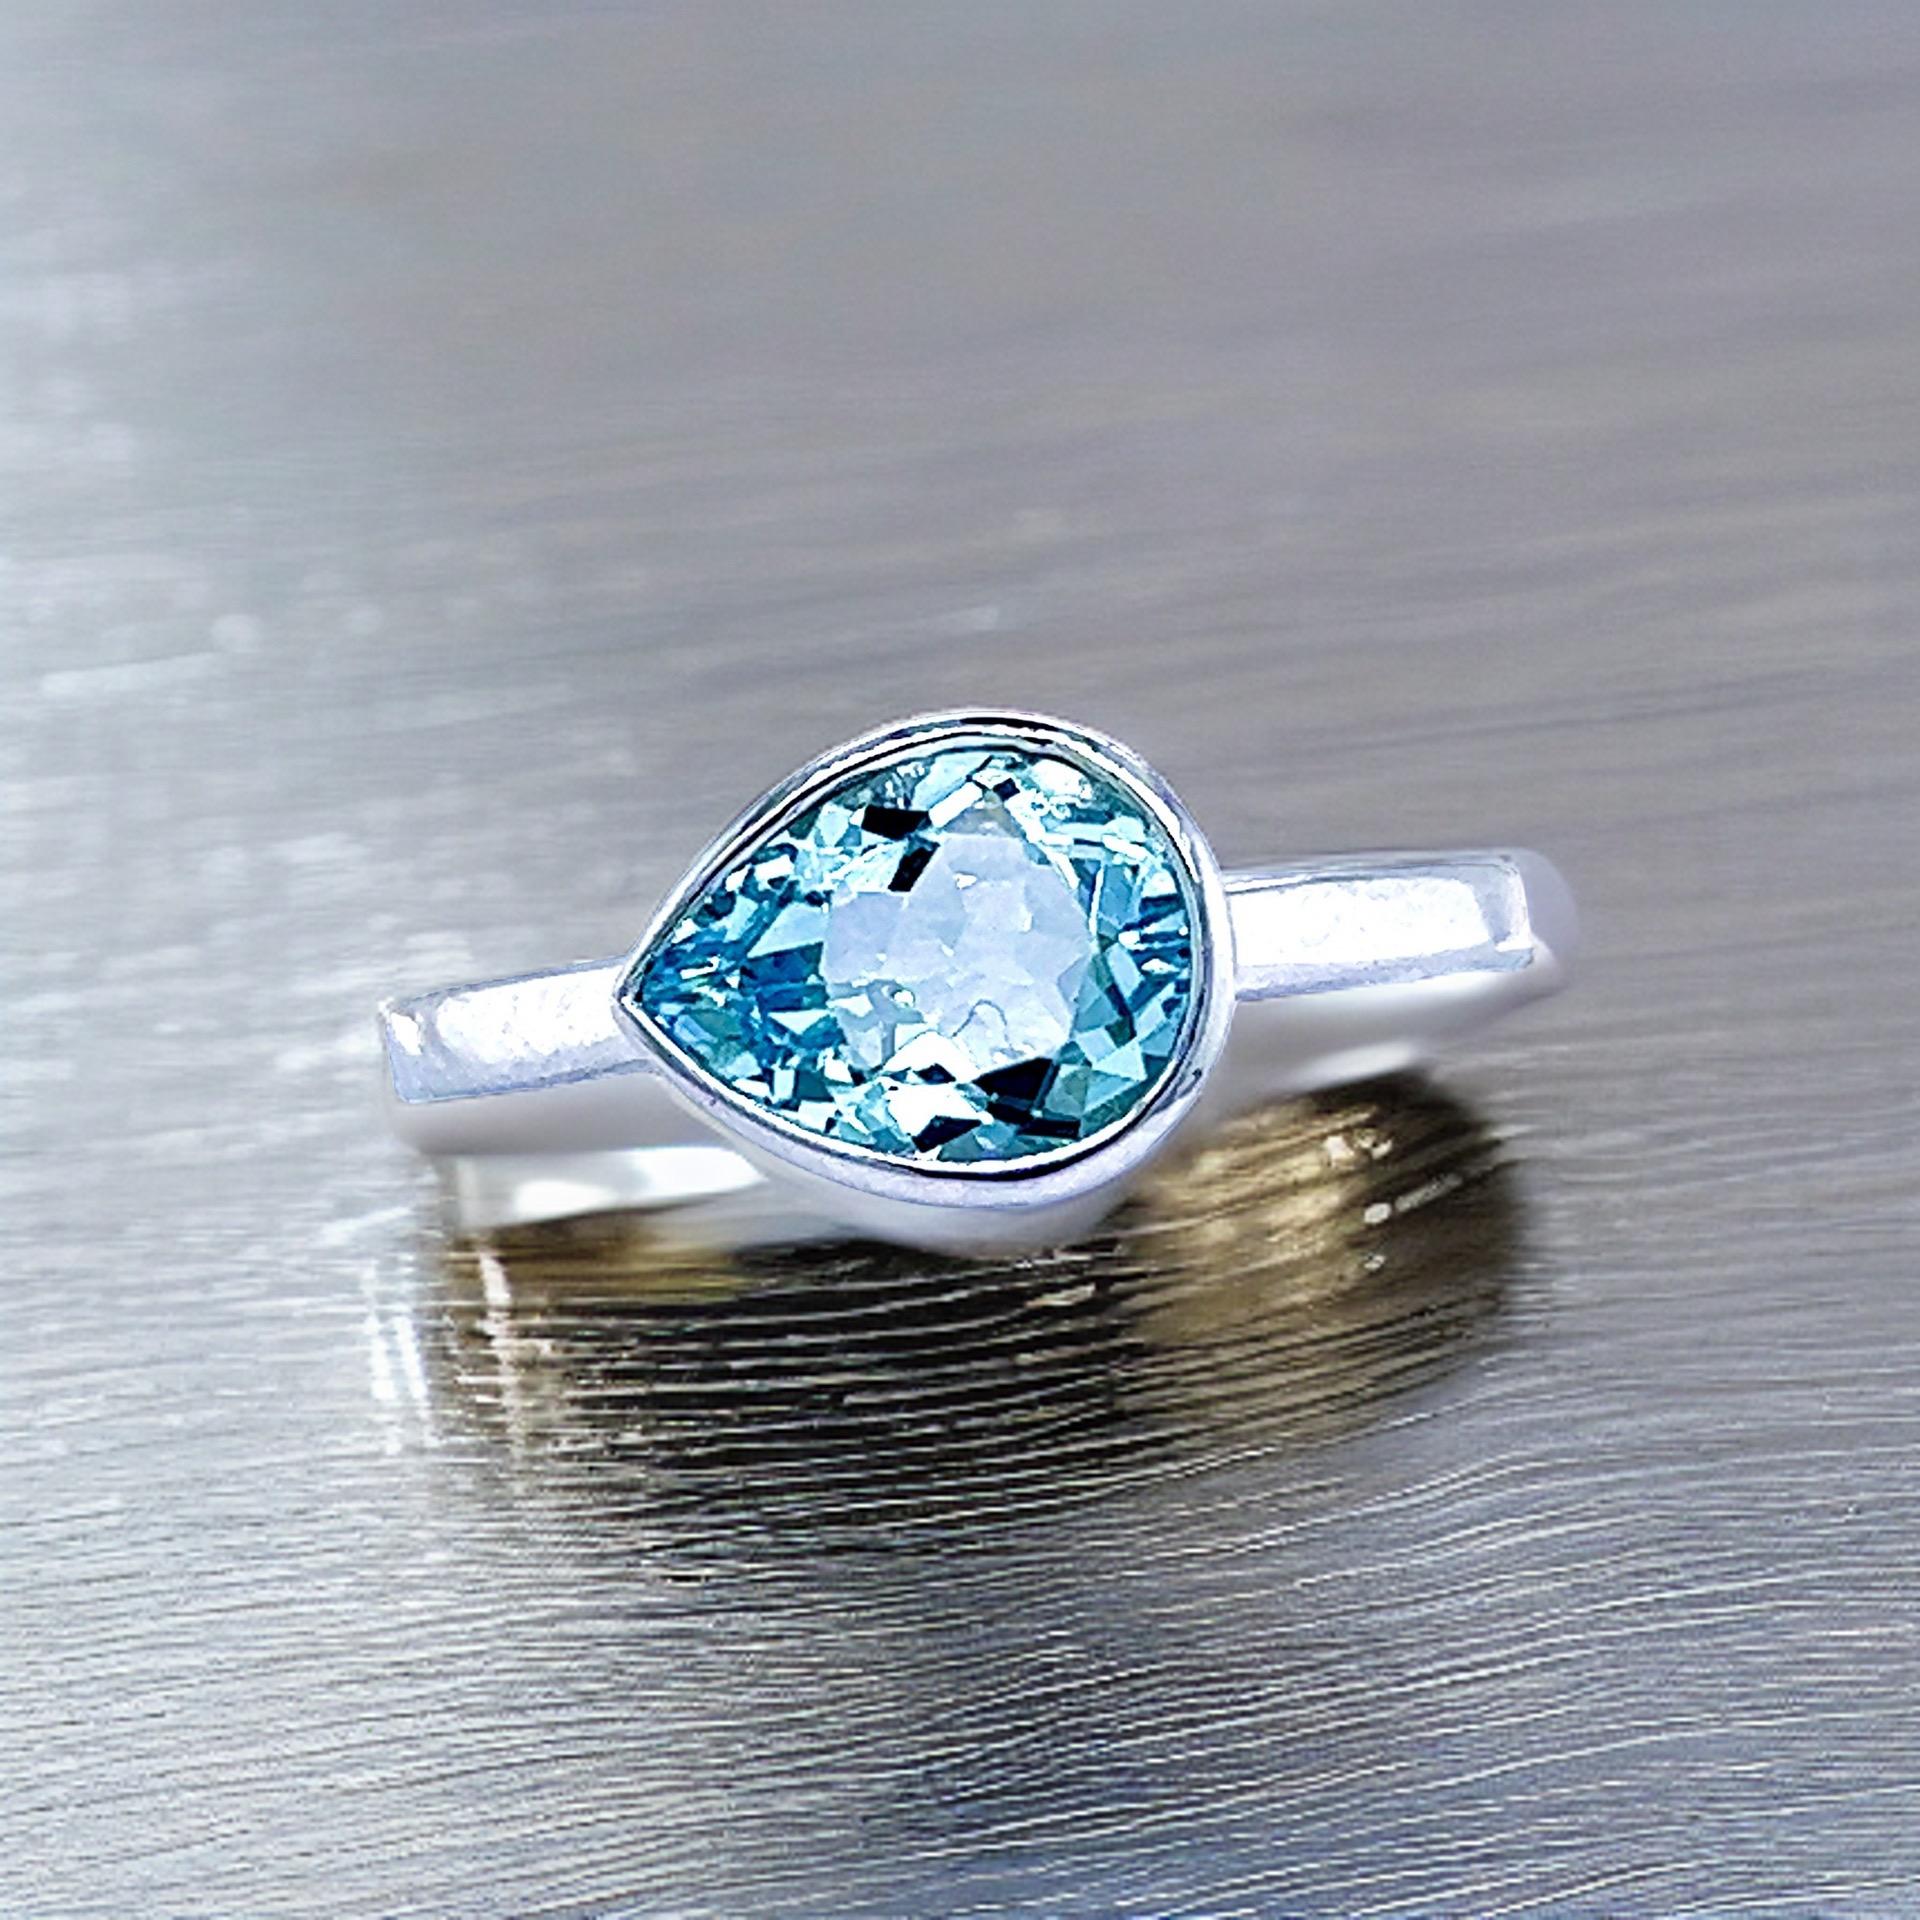 Natural Aquamarine Ring 6.5 14k W Gold 1.37 TCW Certified For Sale 5